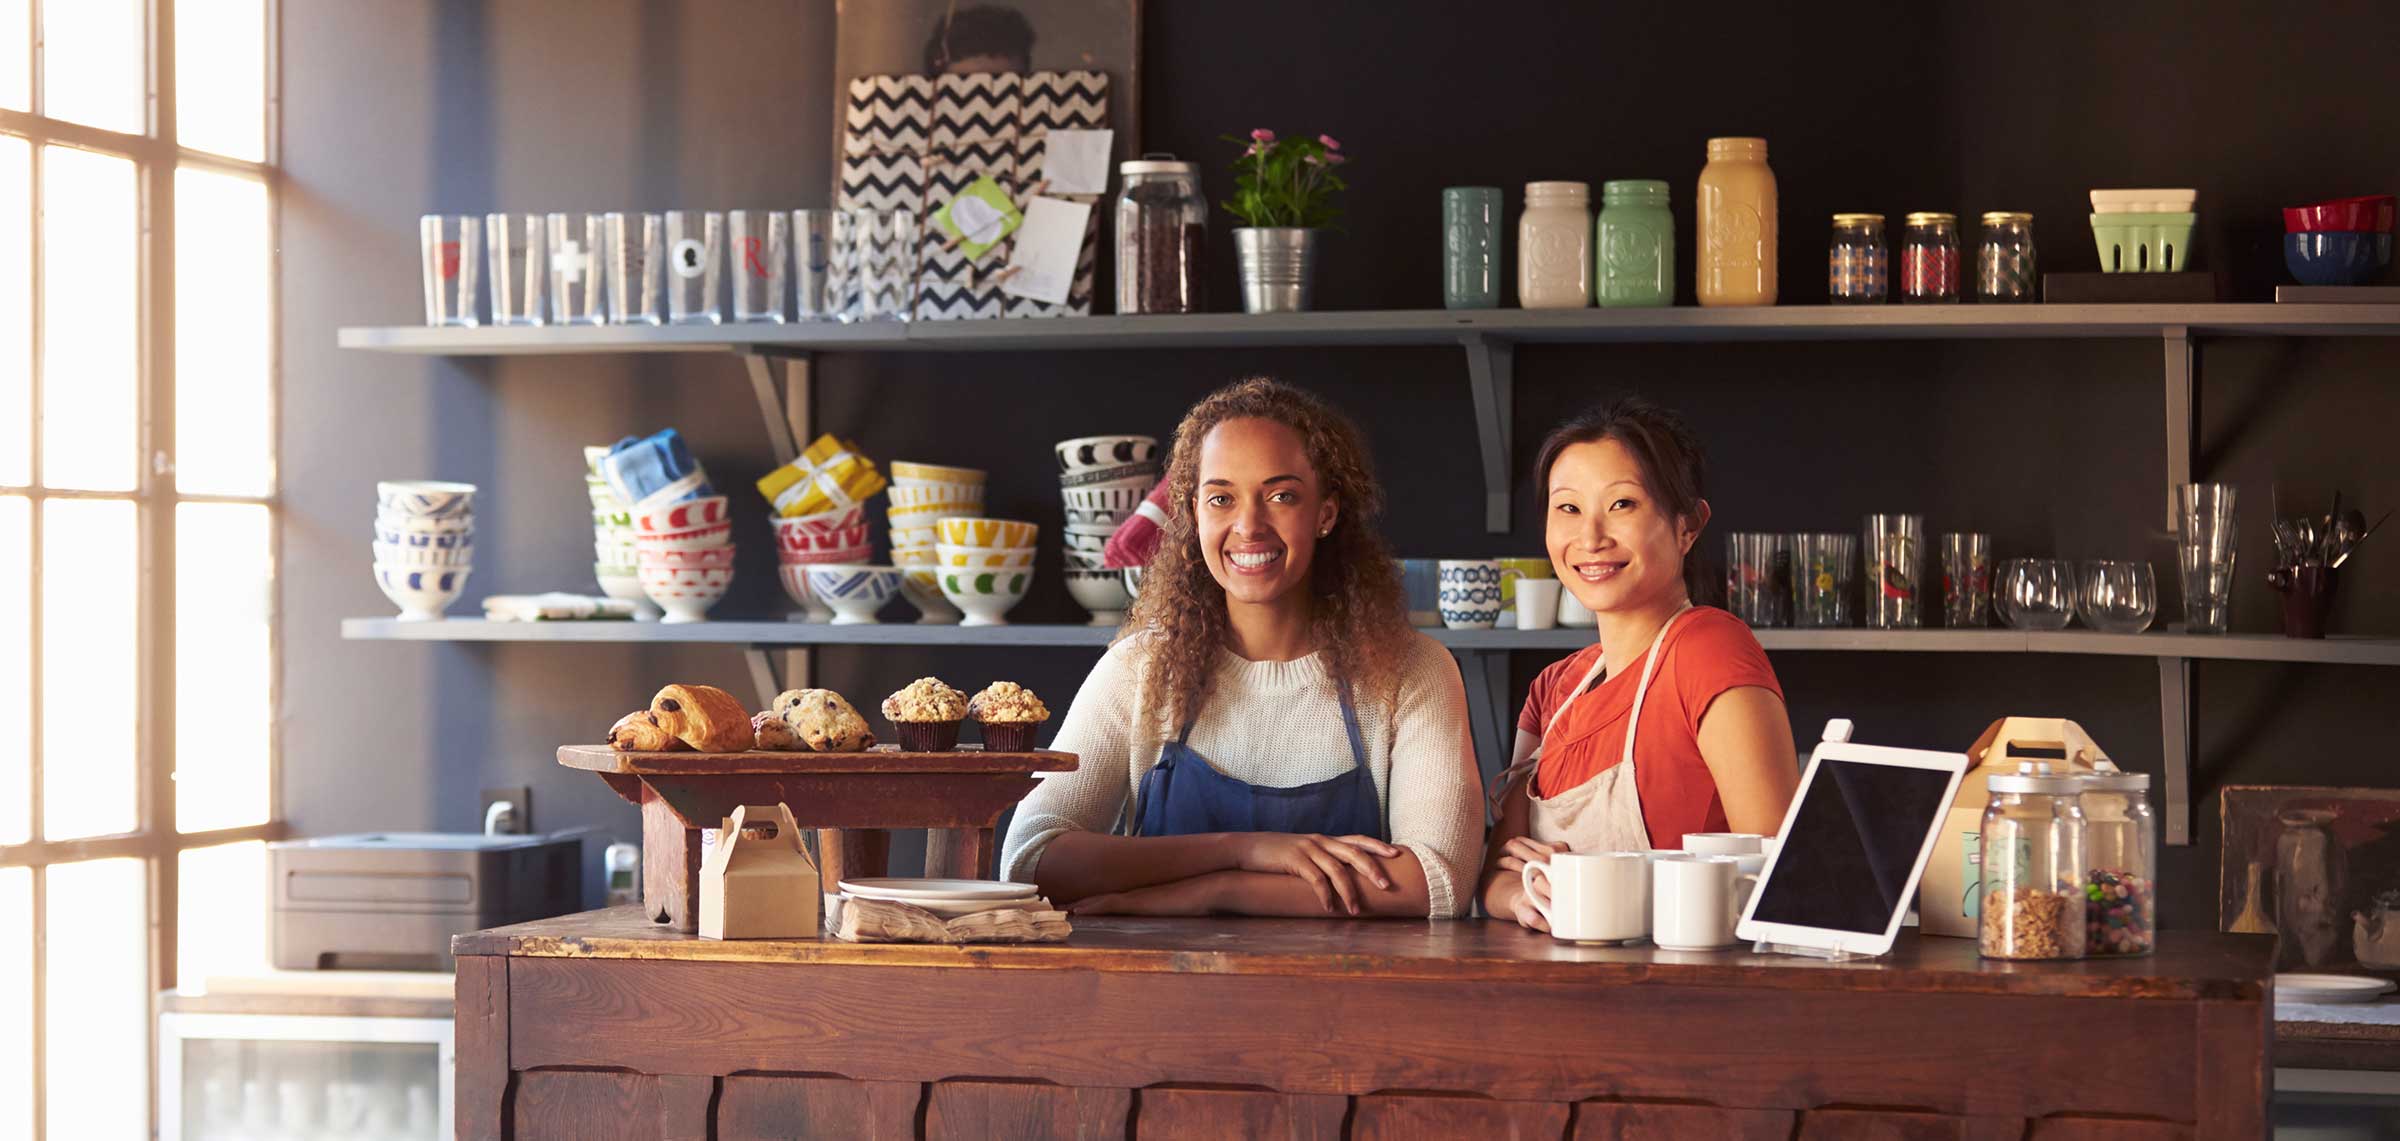 Two women stand behind a wooden coffee shop counter